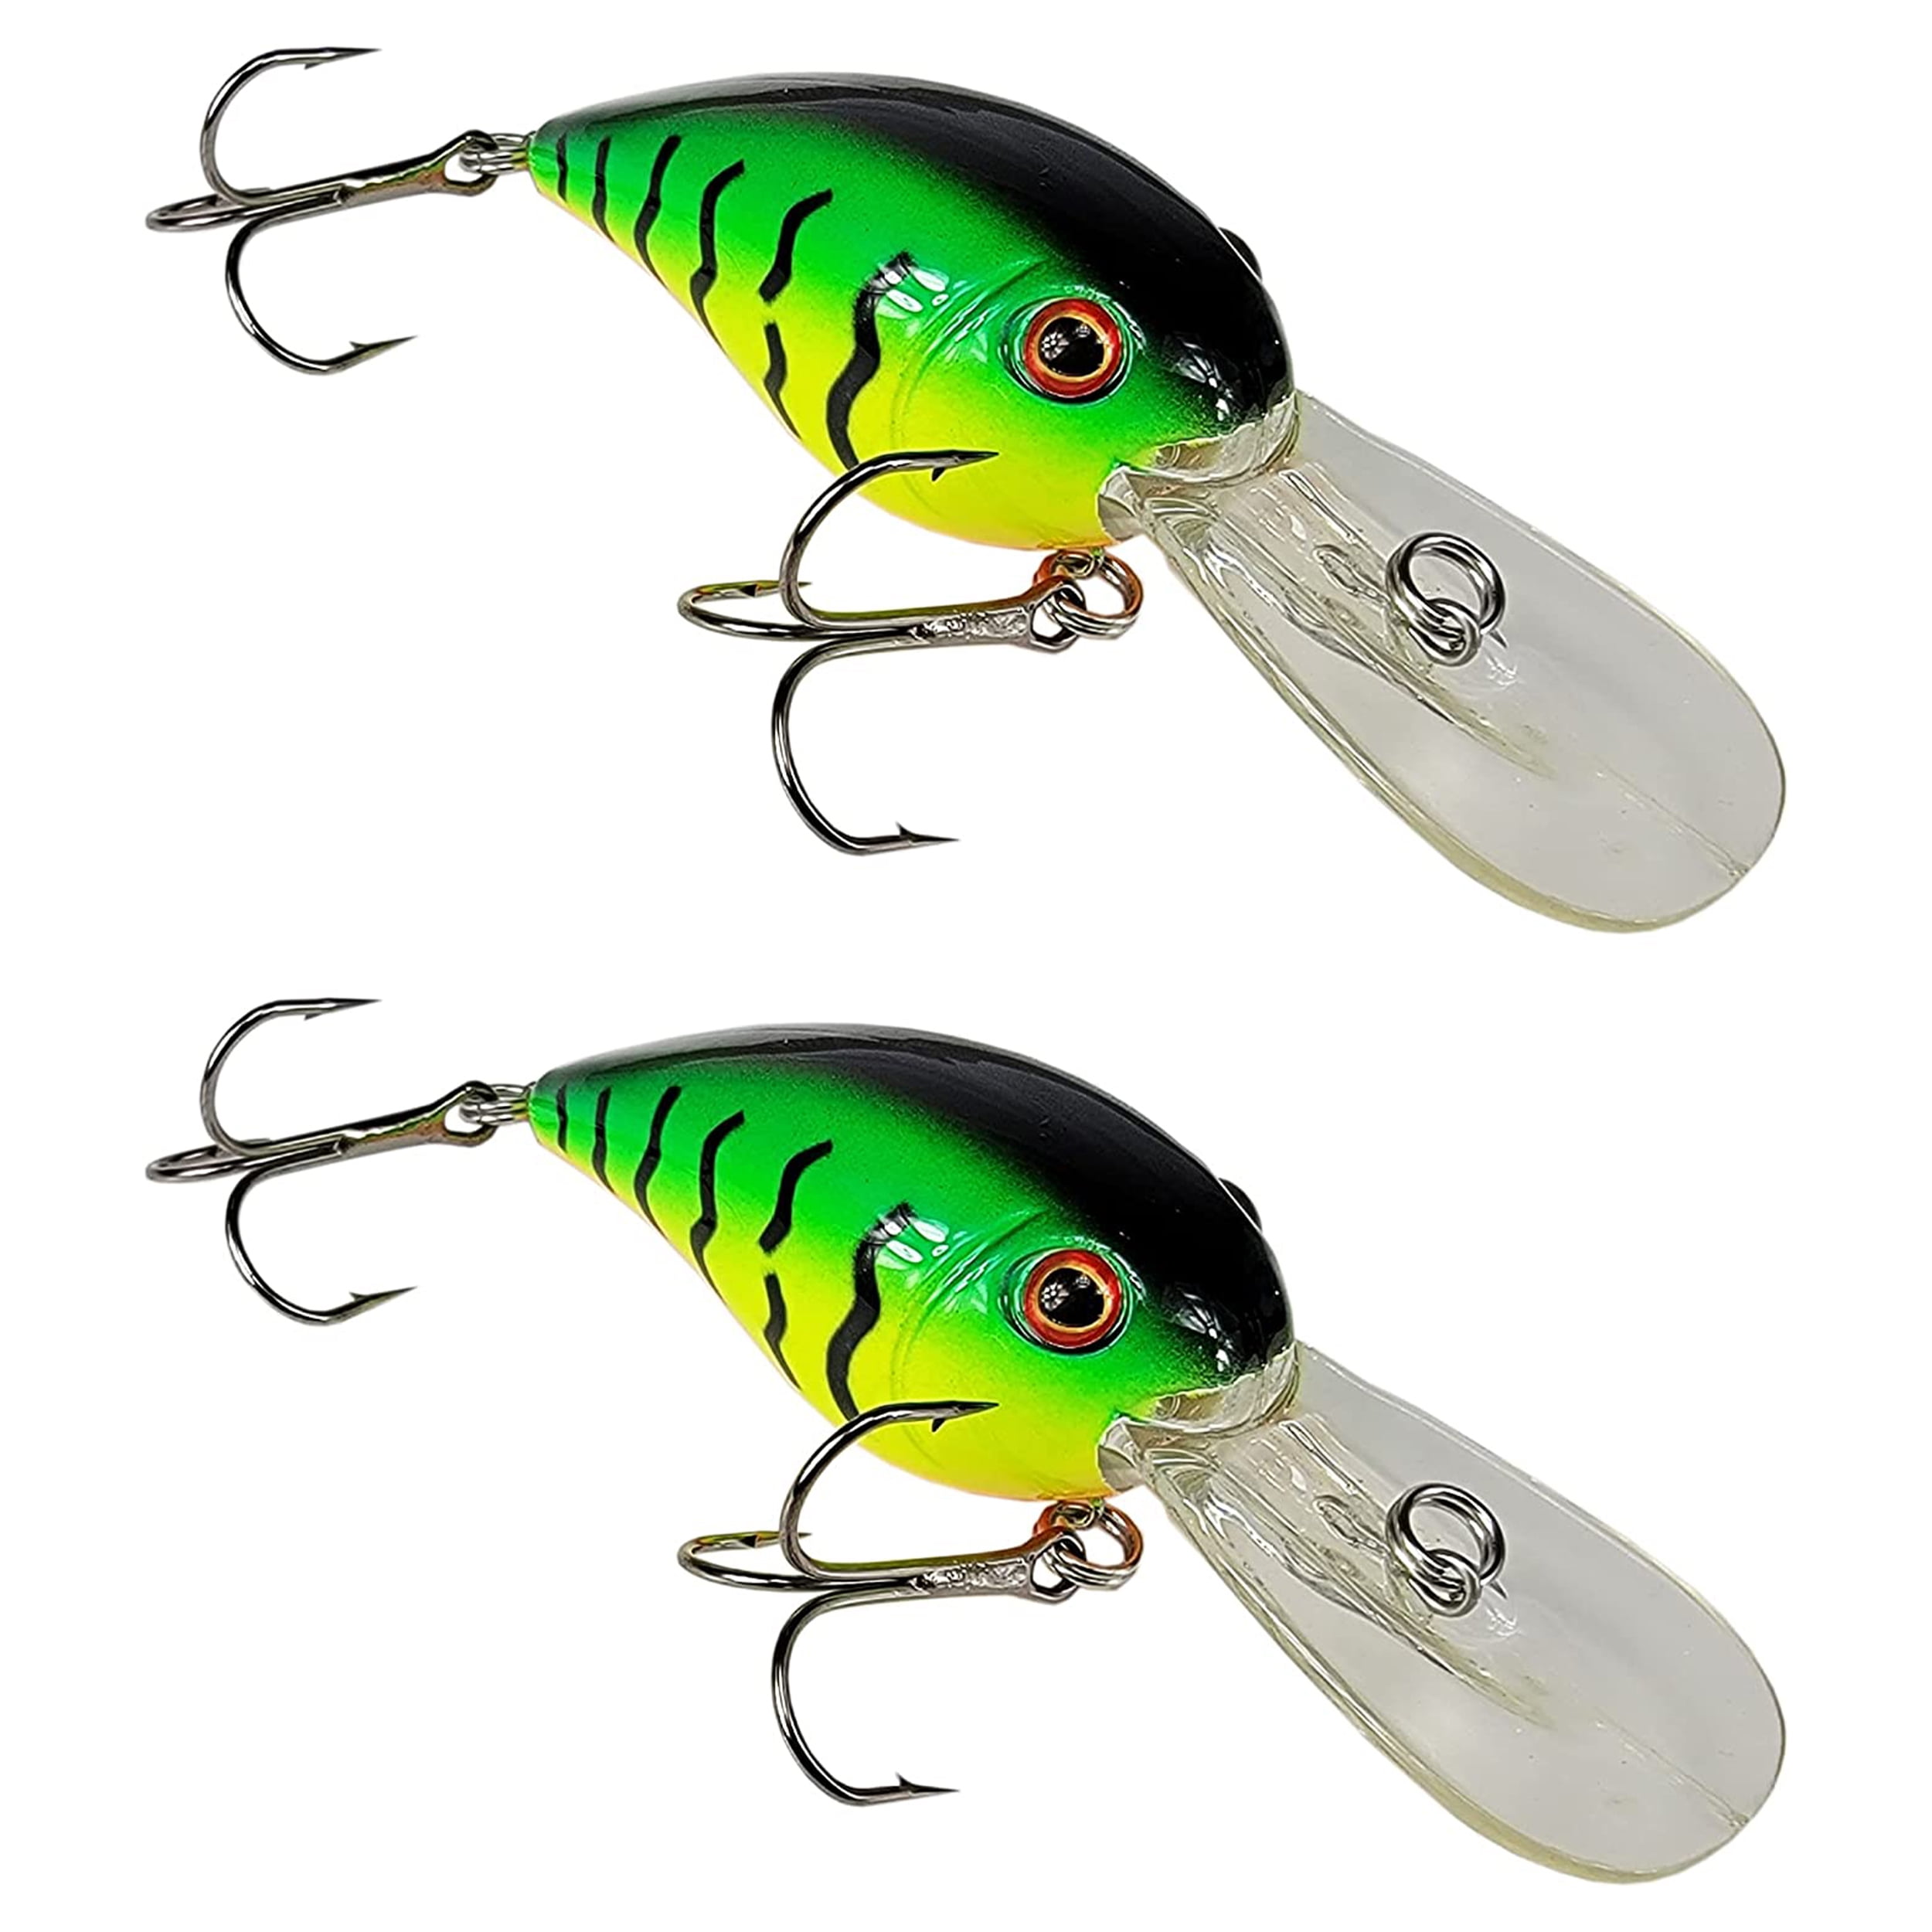 Tackle HD 2-Pack Crankhead Crankbait, Fishing Bait with 9 to 14 Feet Depth,  Fishing Lures for Freshwater or Saltwater, Hard Swimbaits for Bass,  Crappie, or Walleye, Firetiger 